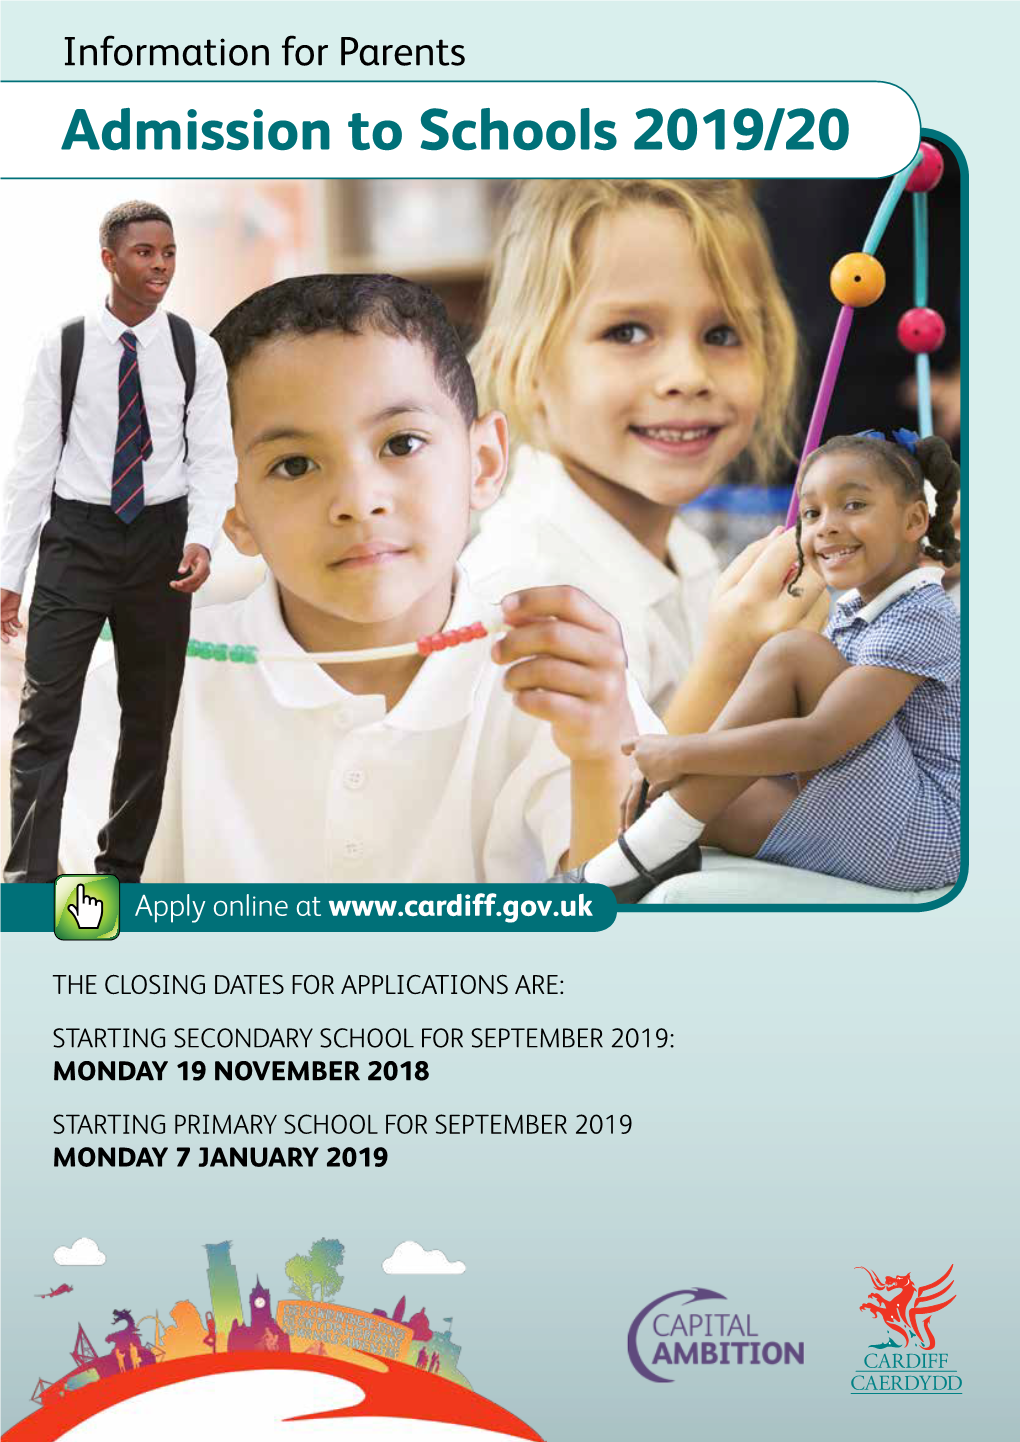 Information for Parents Admission to Schools 2019/20